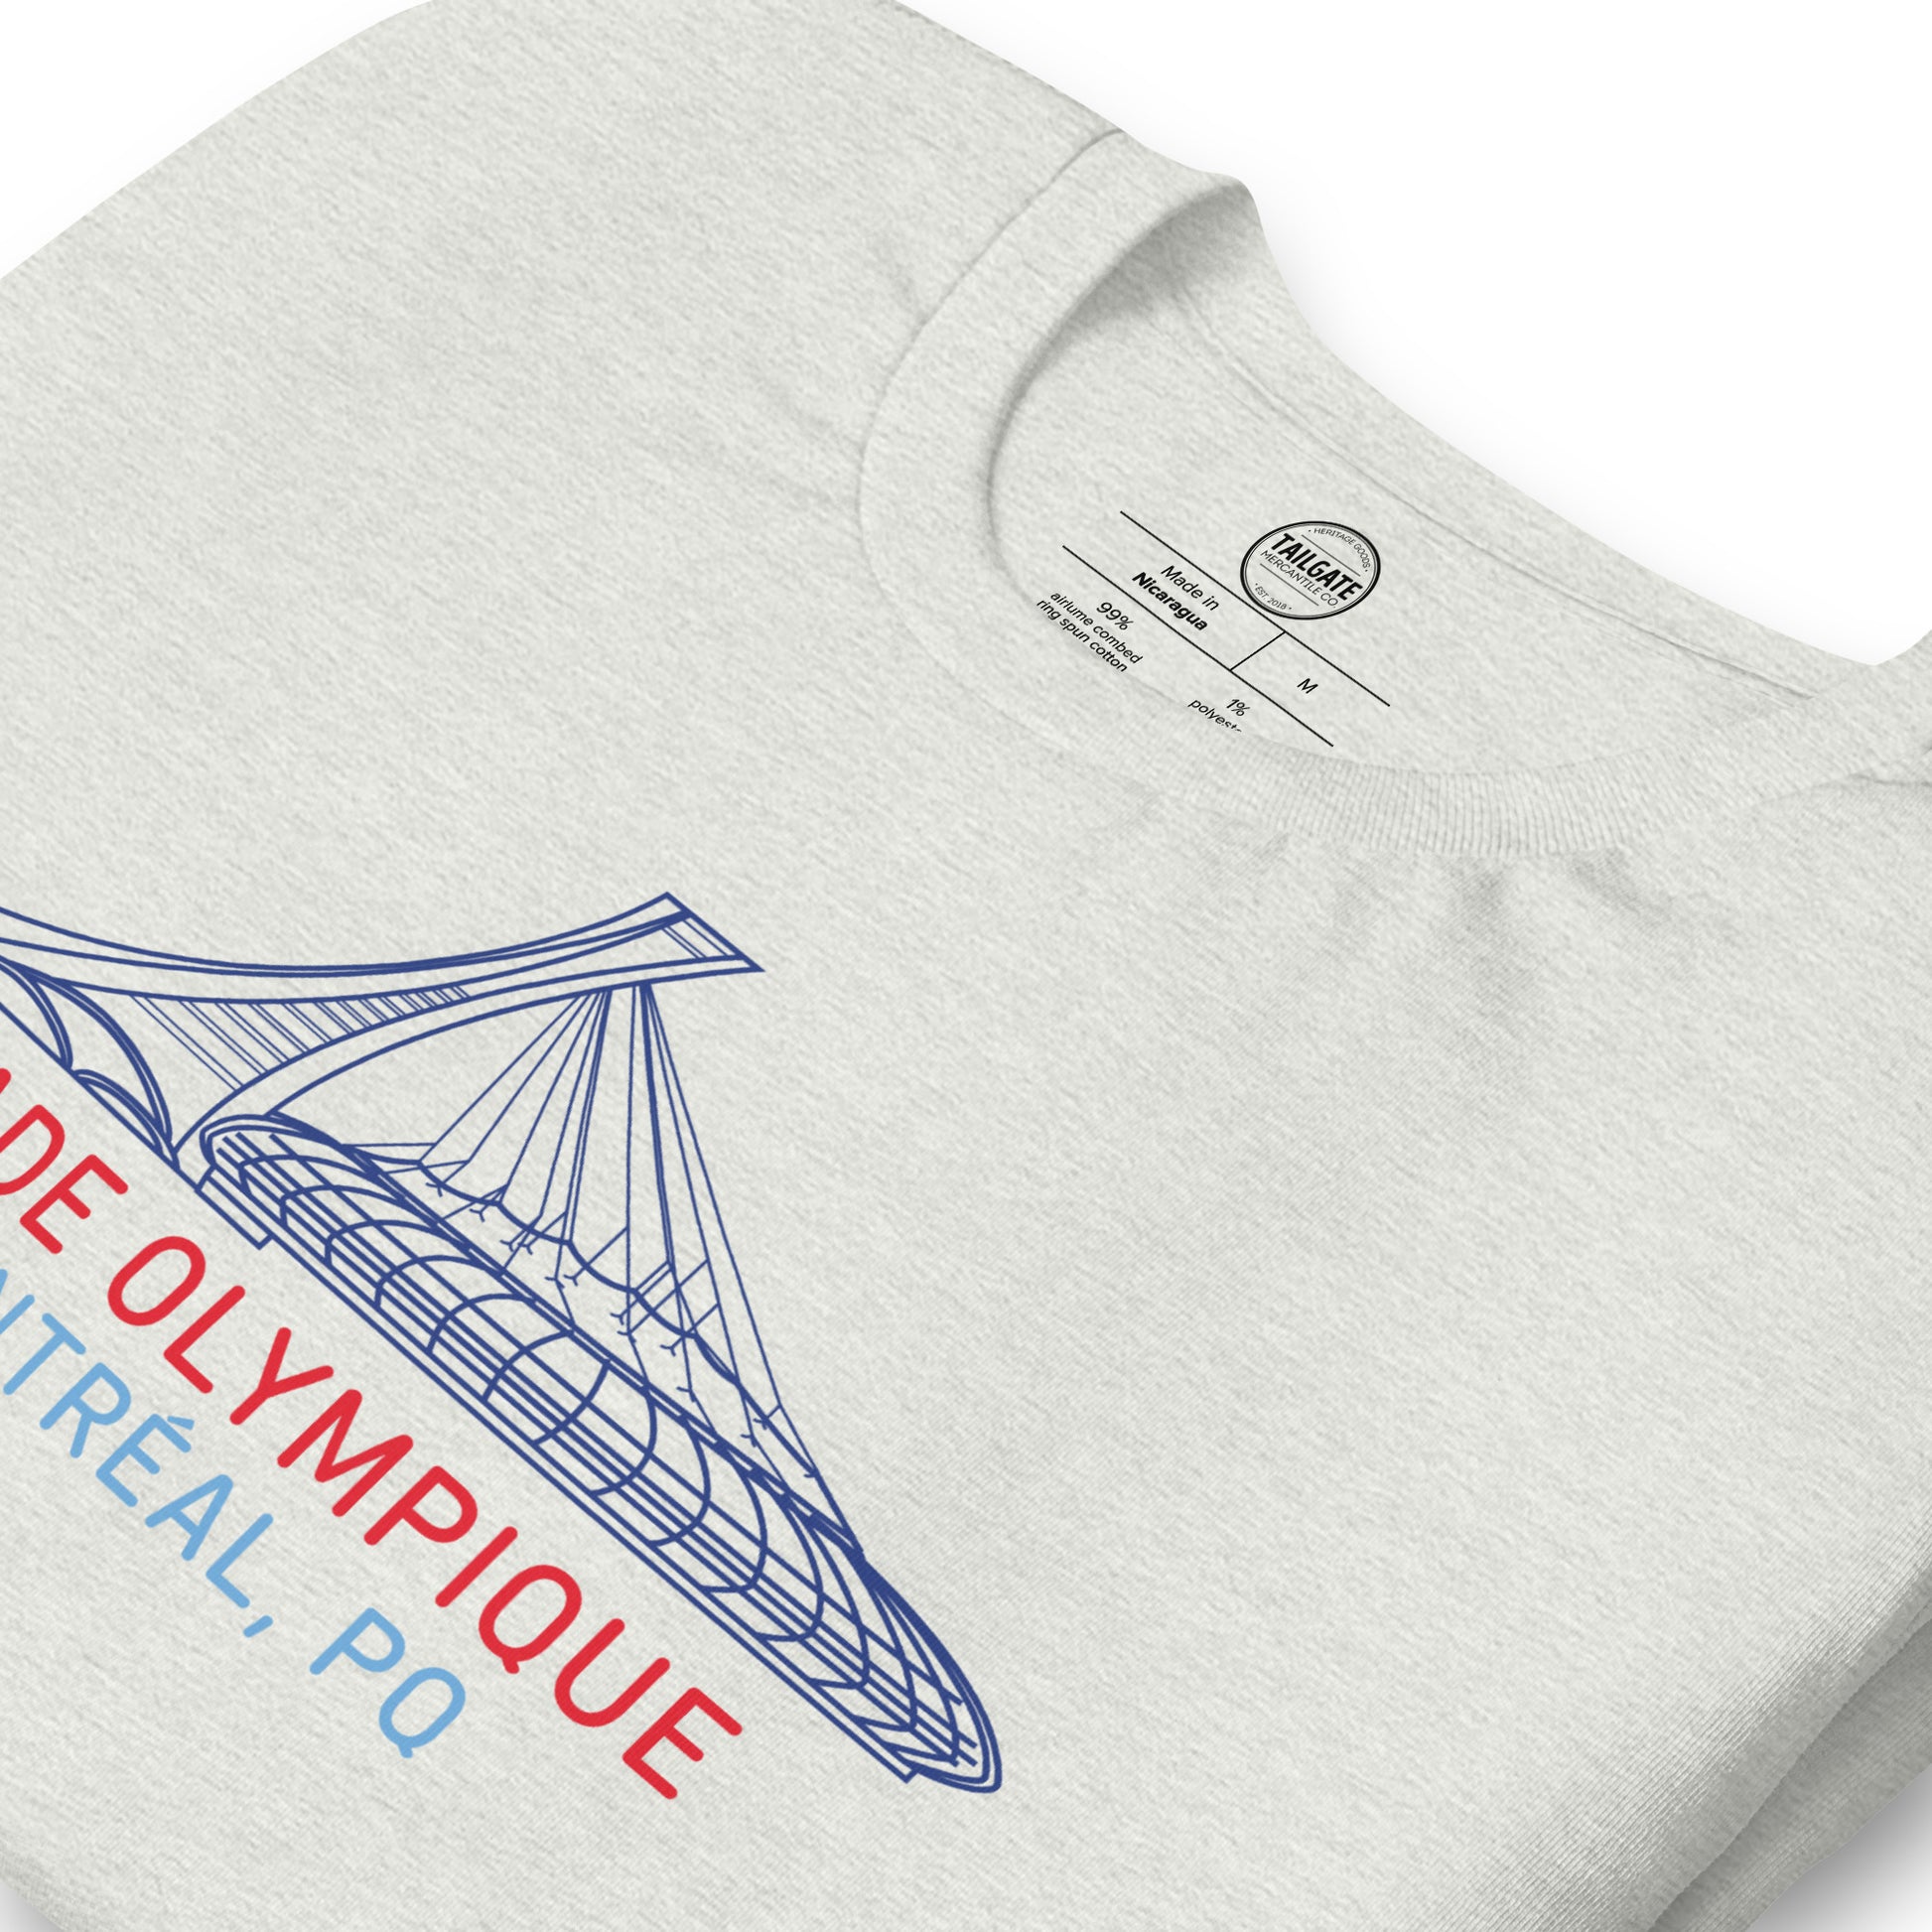 Close up image of heather ash t-shirt with design of "Stade Olympique, Montreal, PQ" illustrated ballpark completed in retro Montreal Expos colours located on centre chest. Image includes neck tag information. This design is exclusive to Tailgate Mercantile and available only online.